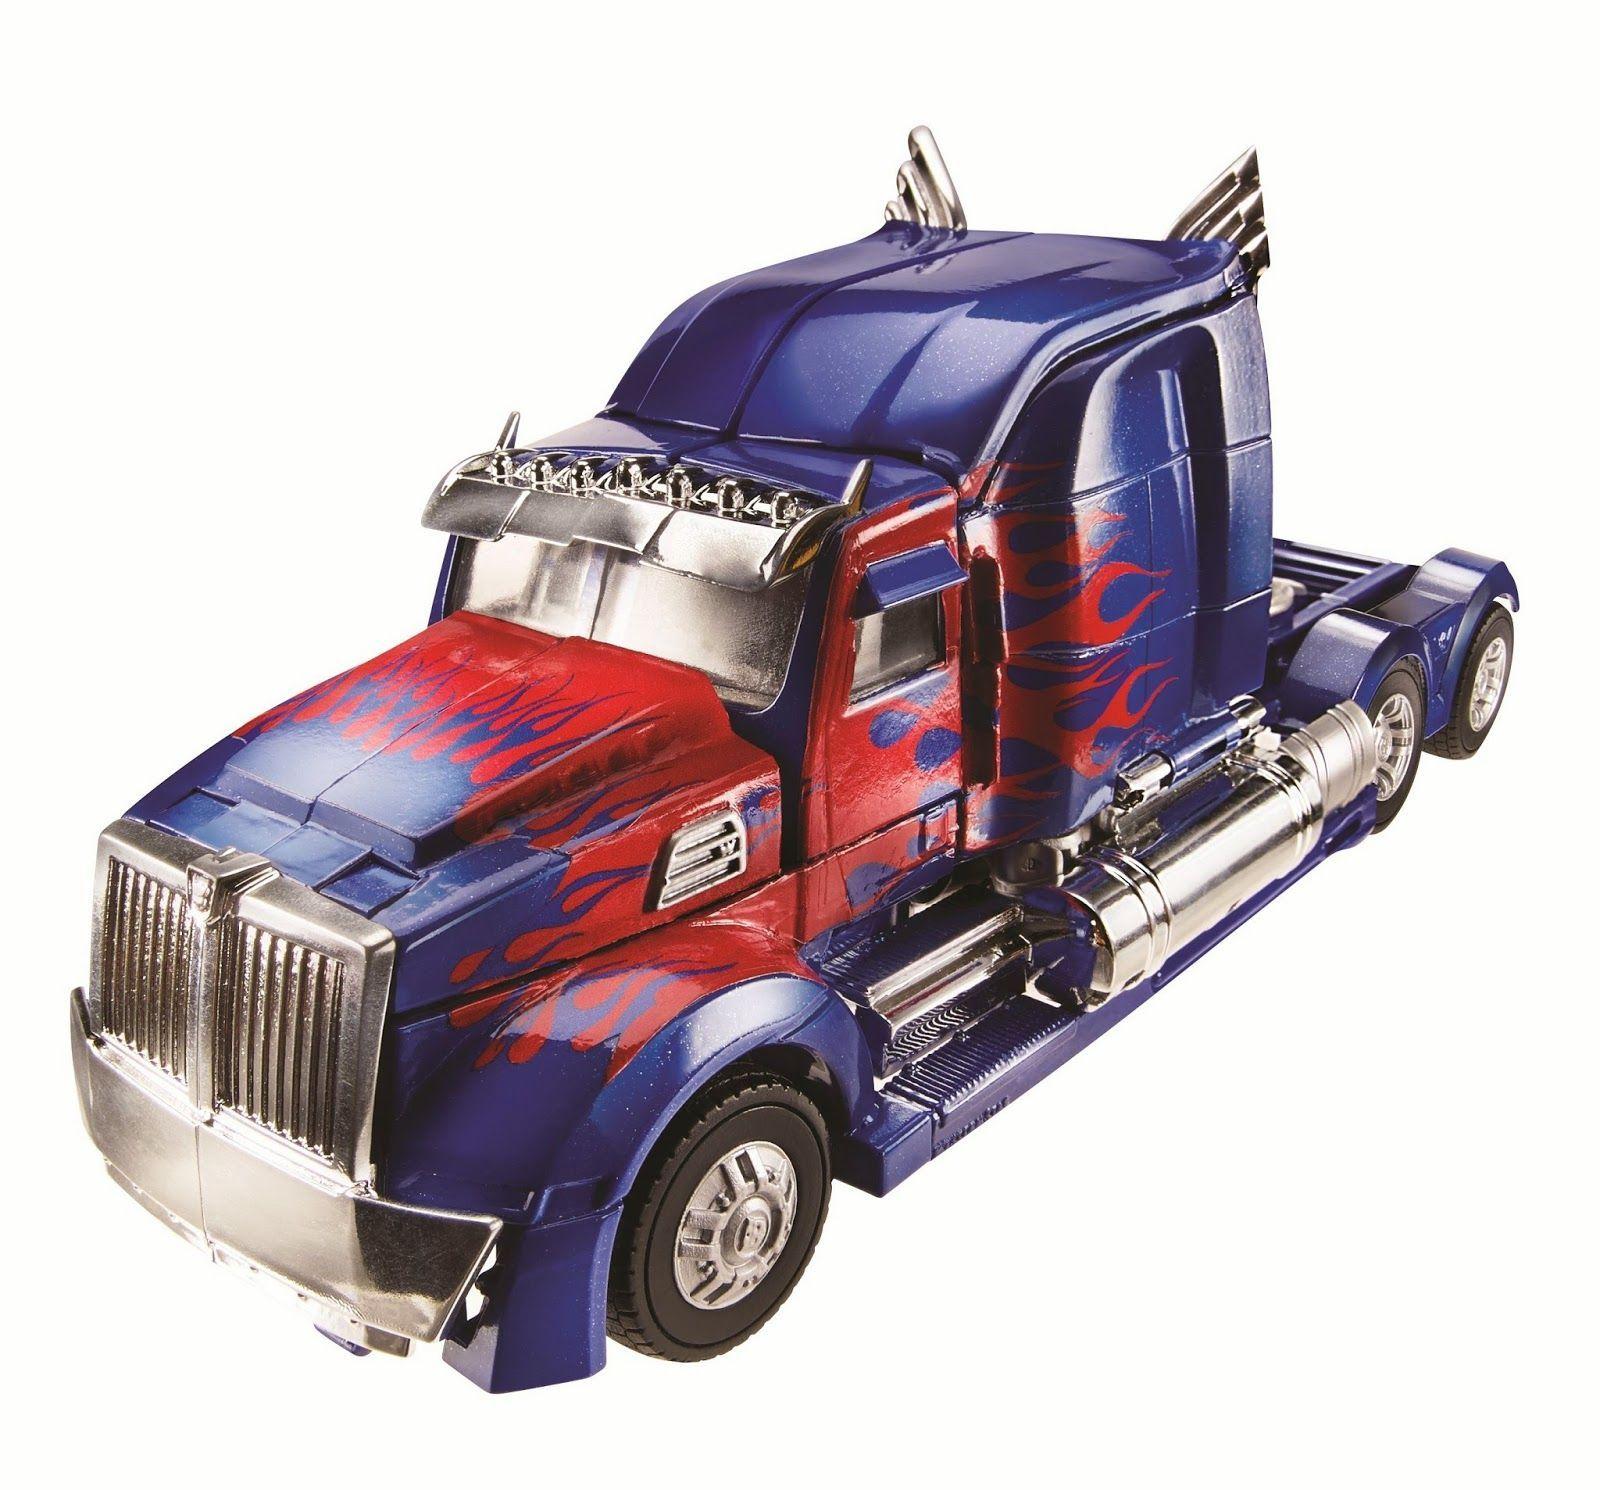 Transformers News: Official Image of TF4 Leader Class Optimus